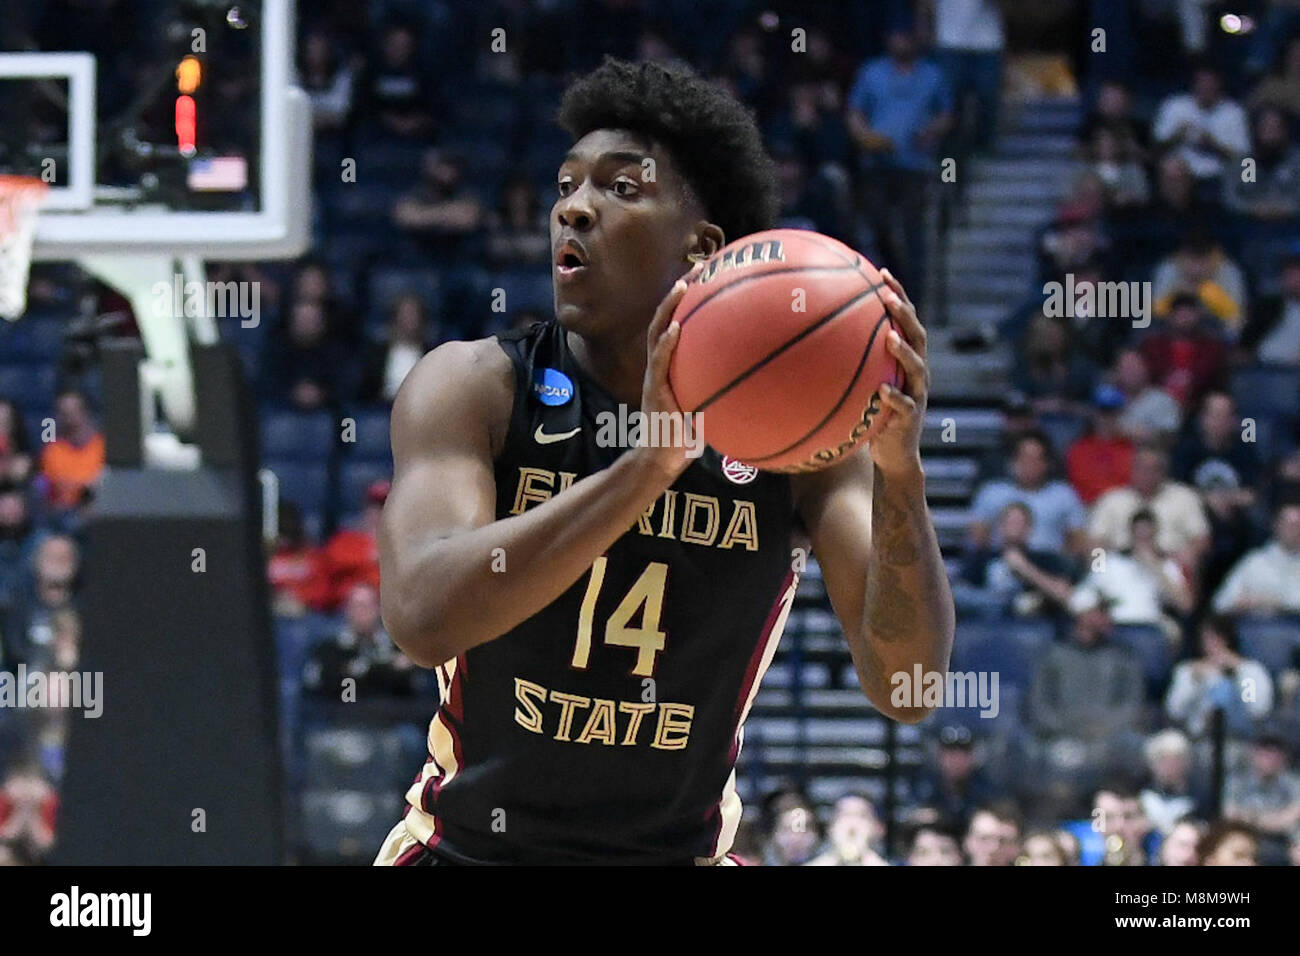 Nashville, Tennessee, USA. 18th Mar, 2018. Florida State Seminoles guard Terrance Mann (14) looks to pass the ball against the Xavier Musketeers at Bridgestone Arena on March 18, 2018 in Nashville, Tennessee. Credit: FGS Sports/Alamy Live News Stock Photo